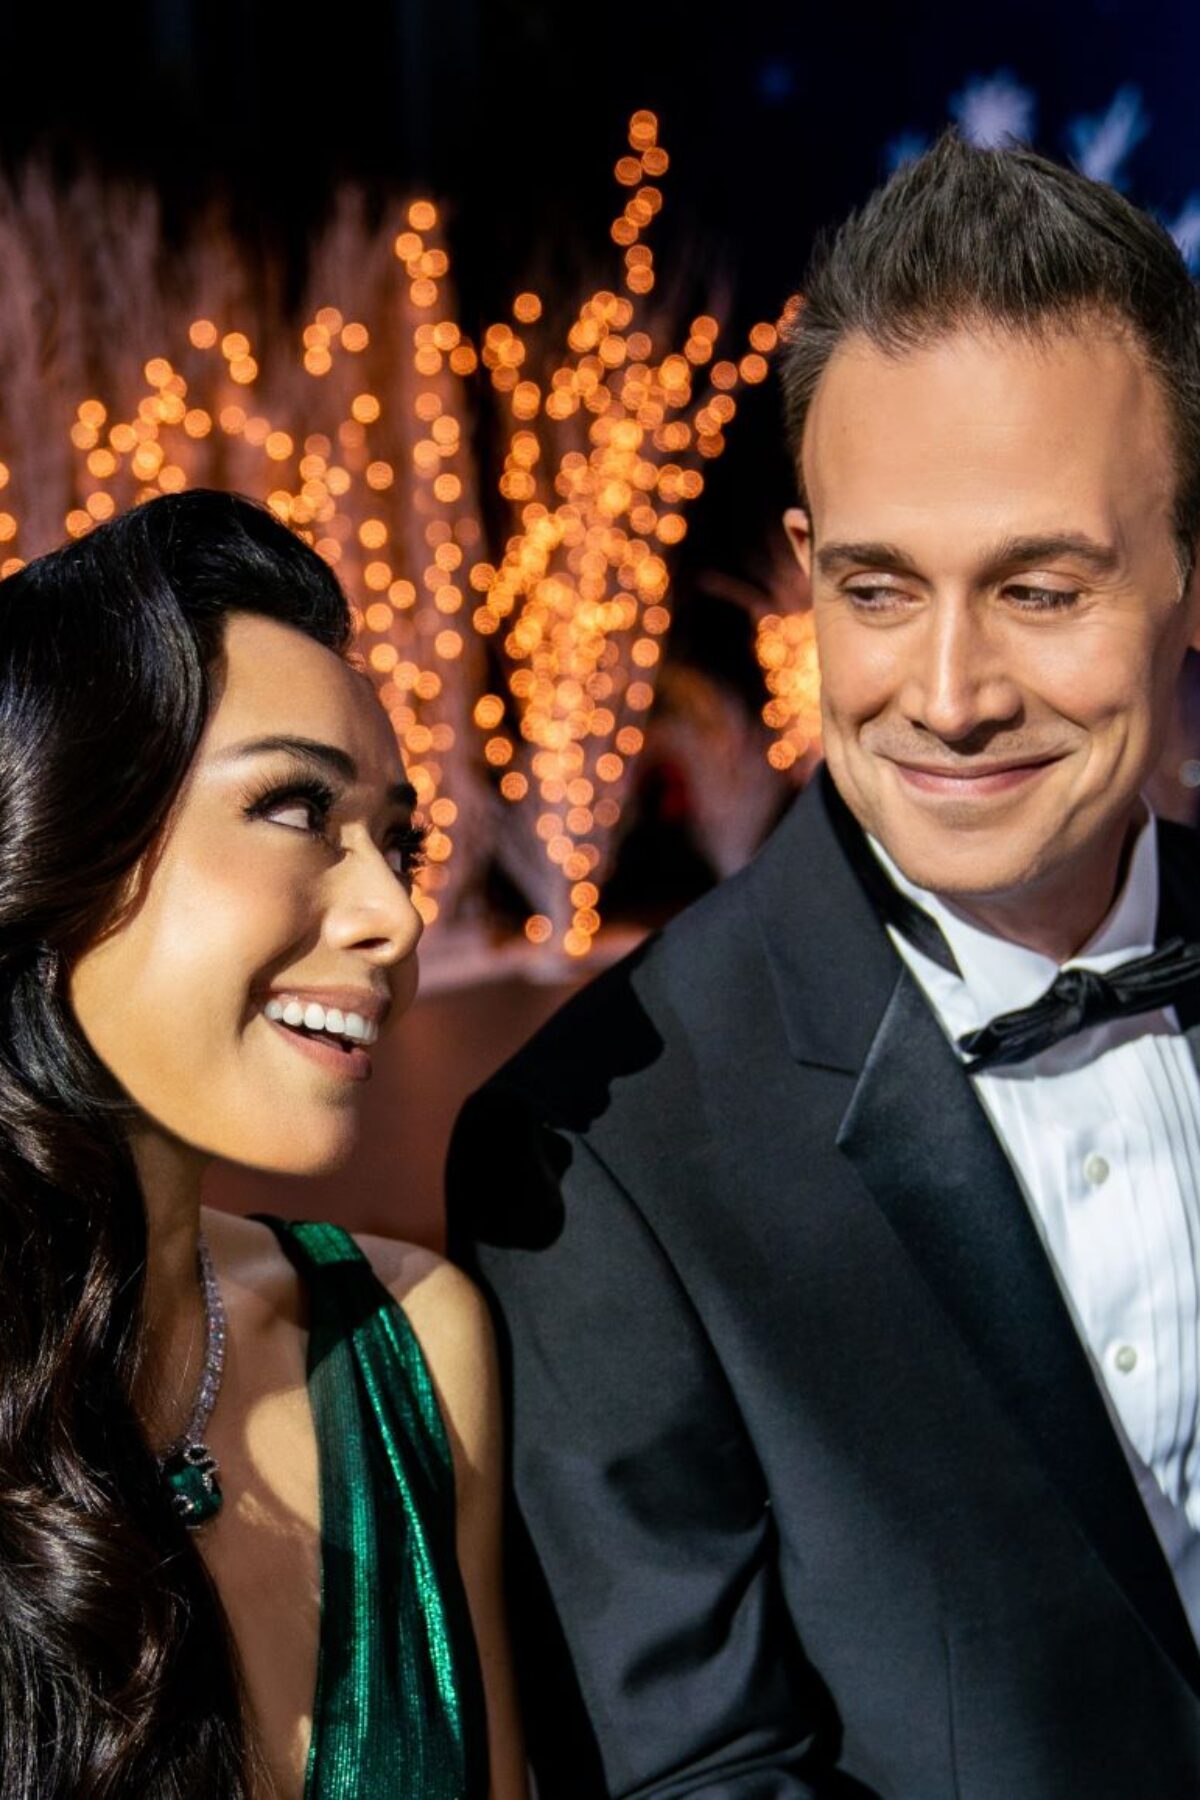 Christmas With You. (L to R) Aimee Garcia as Angelina, Freddie Prinze Jr as Miguel in Christmas With You. Cr. Jessica Kourkounis/Netflix © 2022.